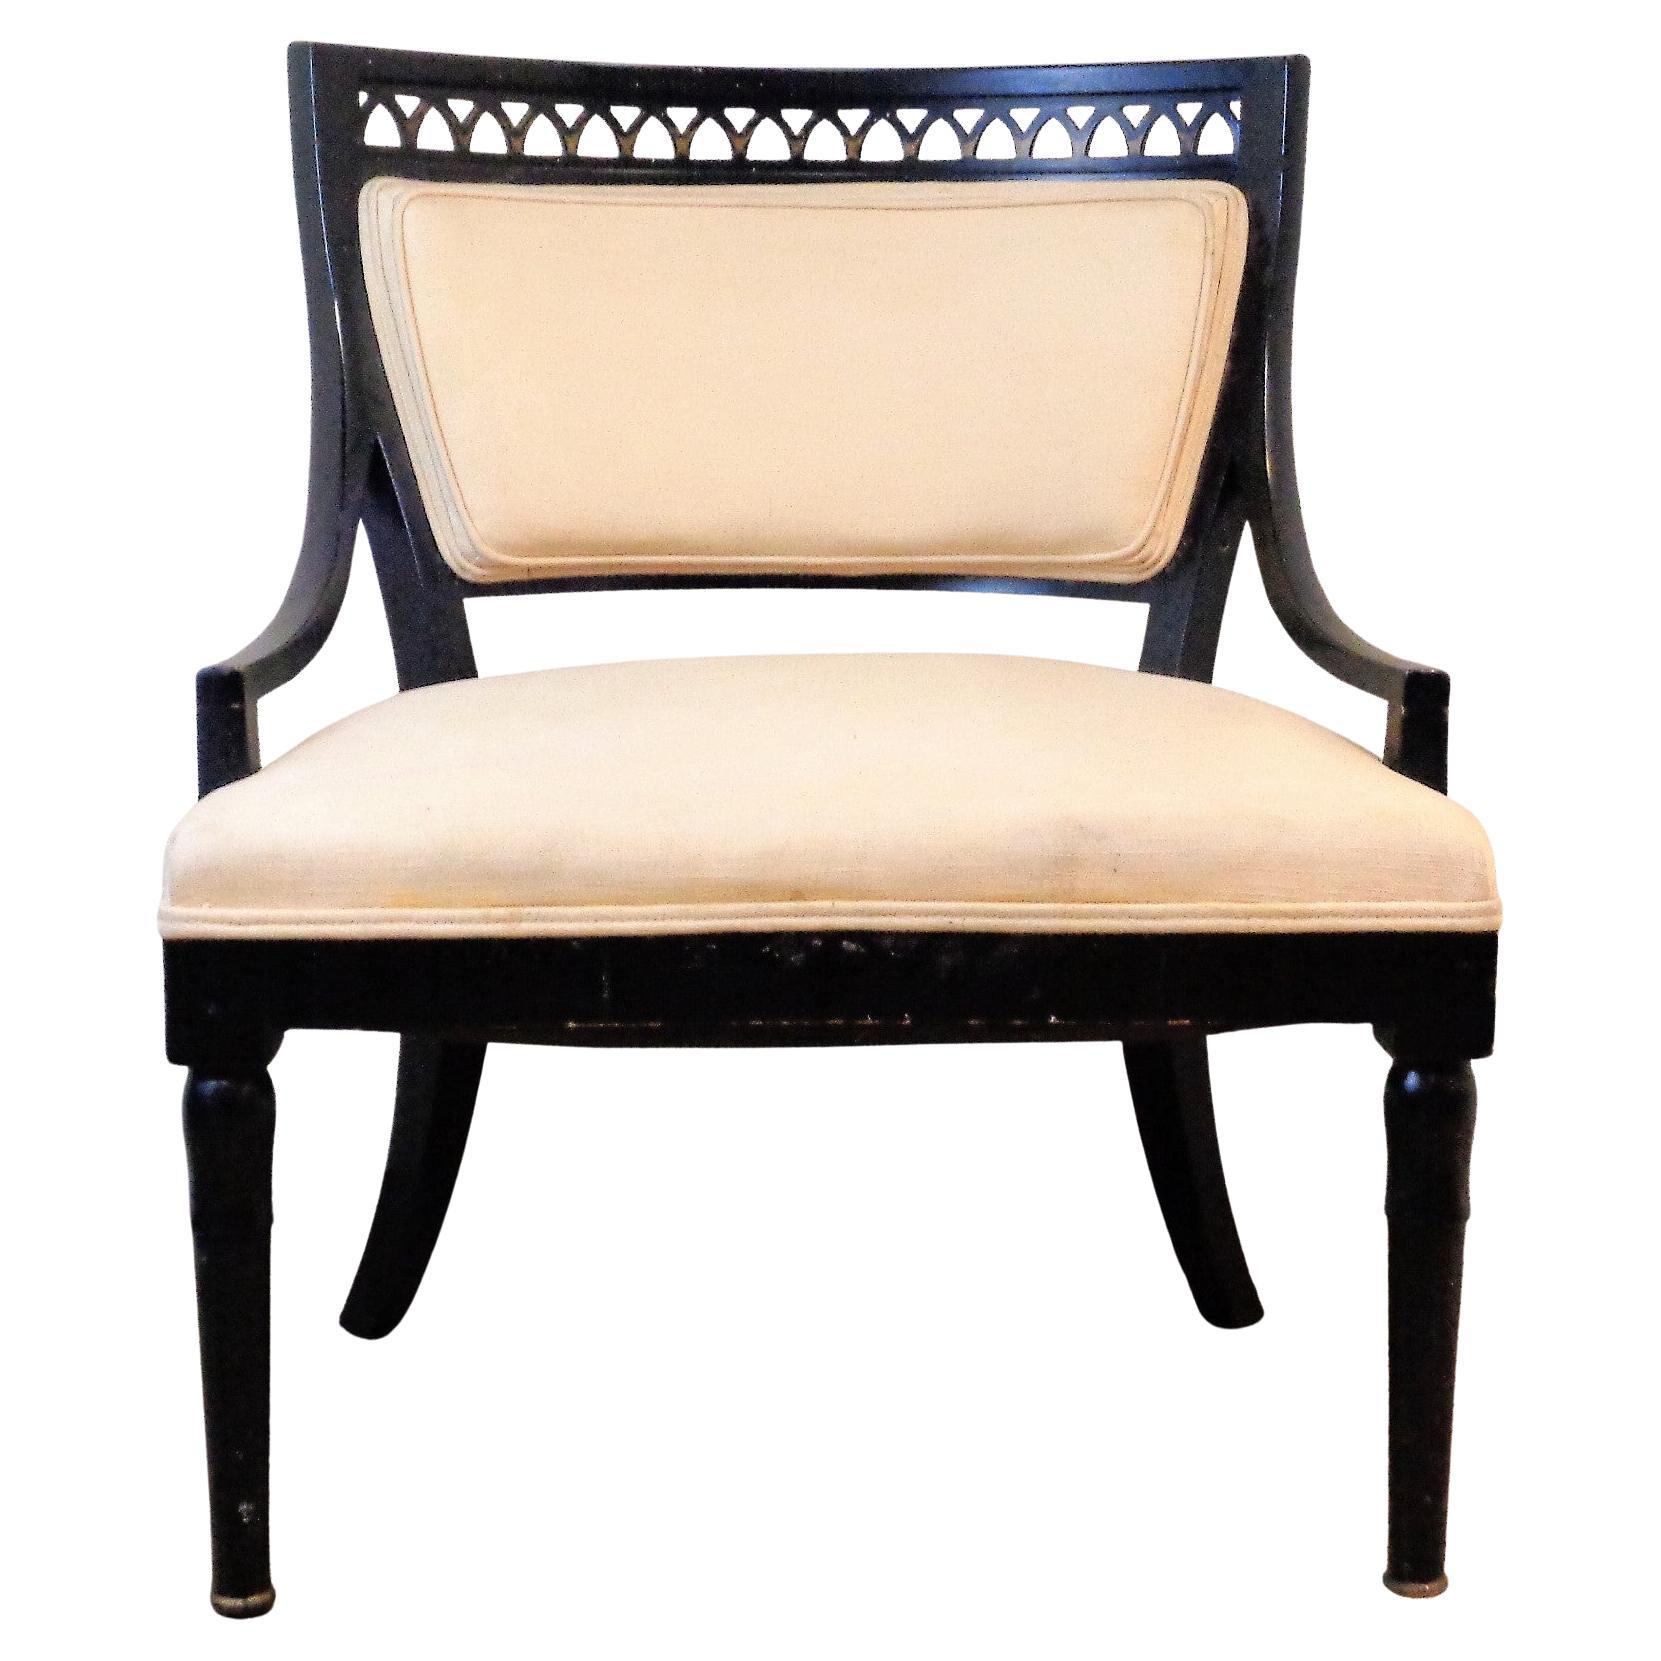  Neoclassical Style Black Lacquered Lounge Chair In Excellent Condition For Sale In Rochester, NY